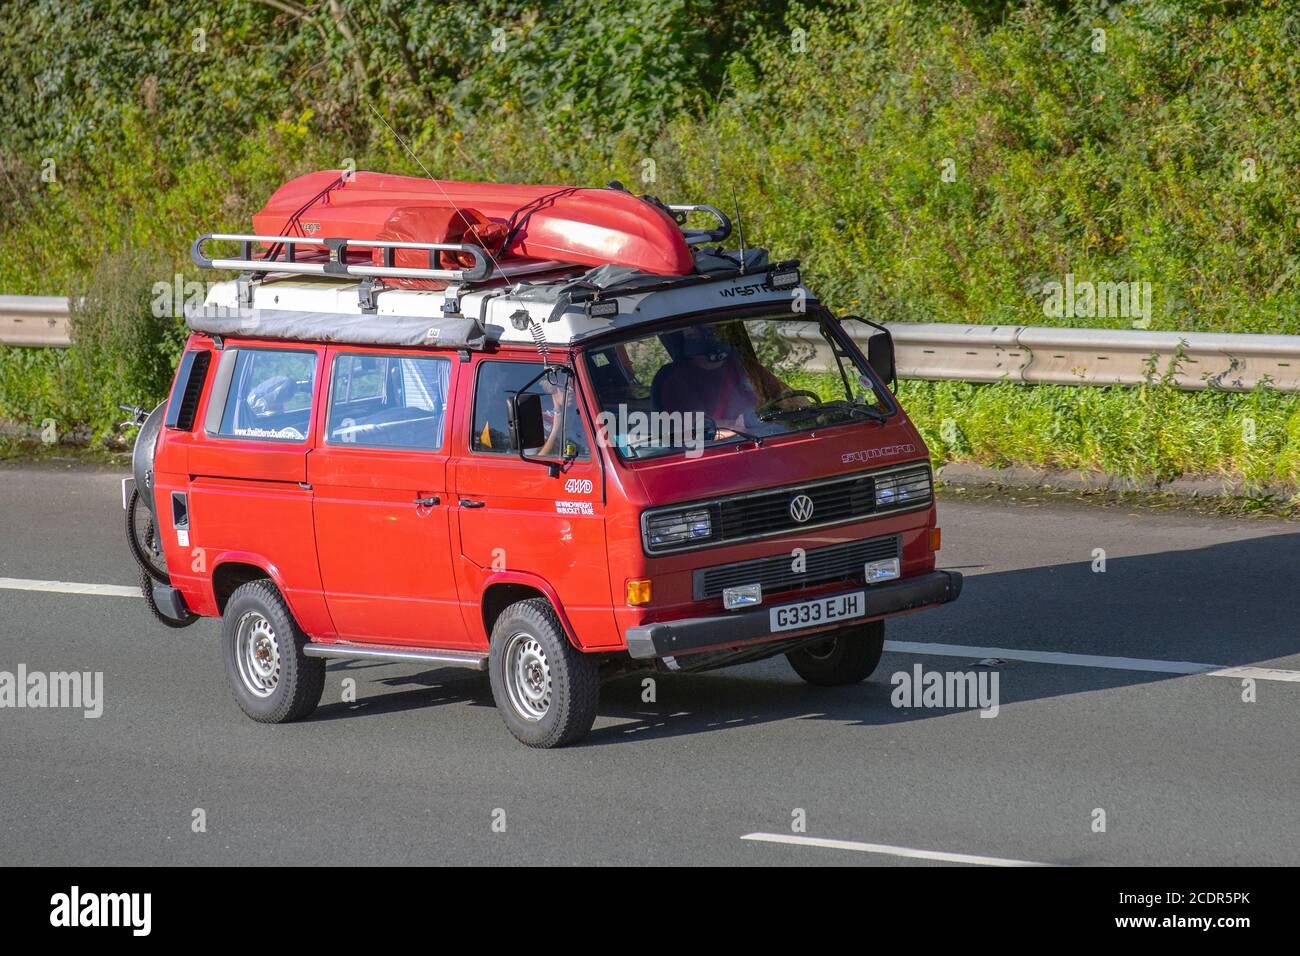 1989 80s red VW Volkswagen; Caravans and Motorhomes, campervans on Britain's roads, RV leisure vehicle, family holidays, caravanette vacations, Touring caravan holiday, van conversions, Vanagon autohome, life on the road, Dormobile Stock Photo